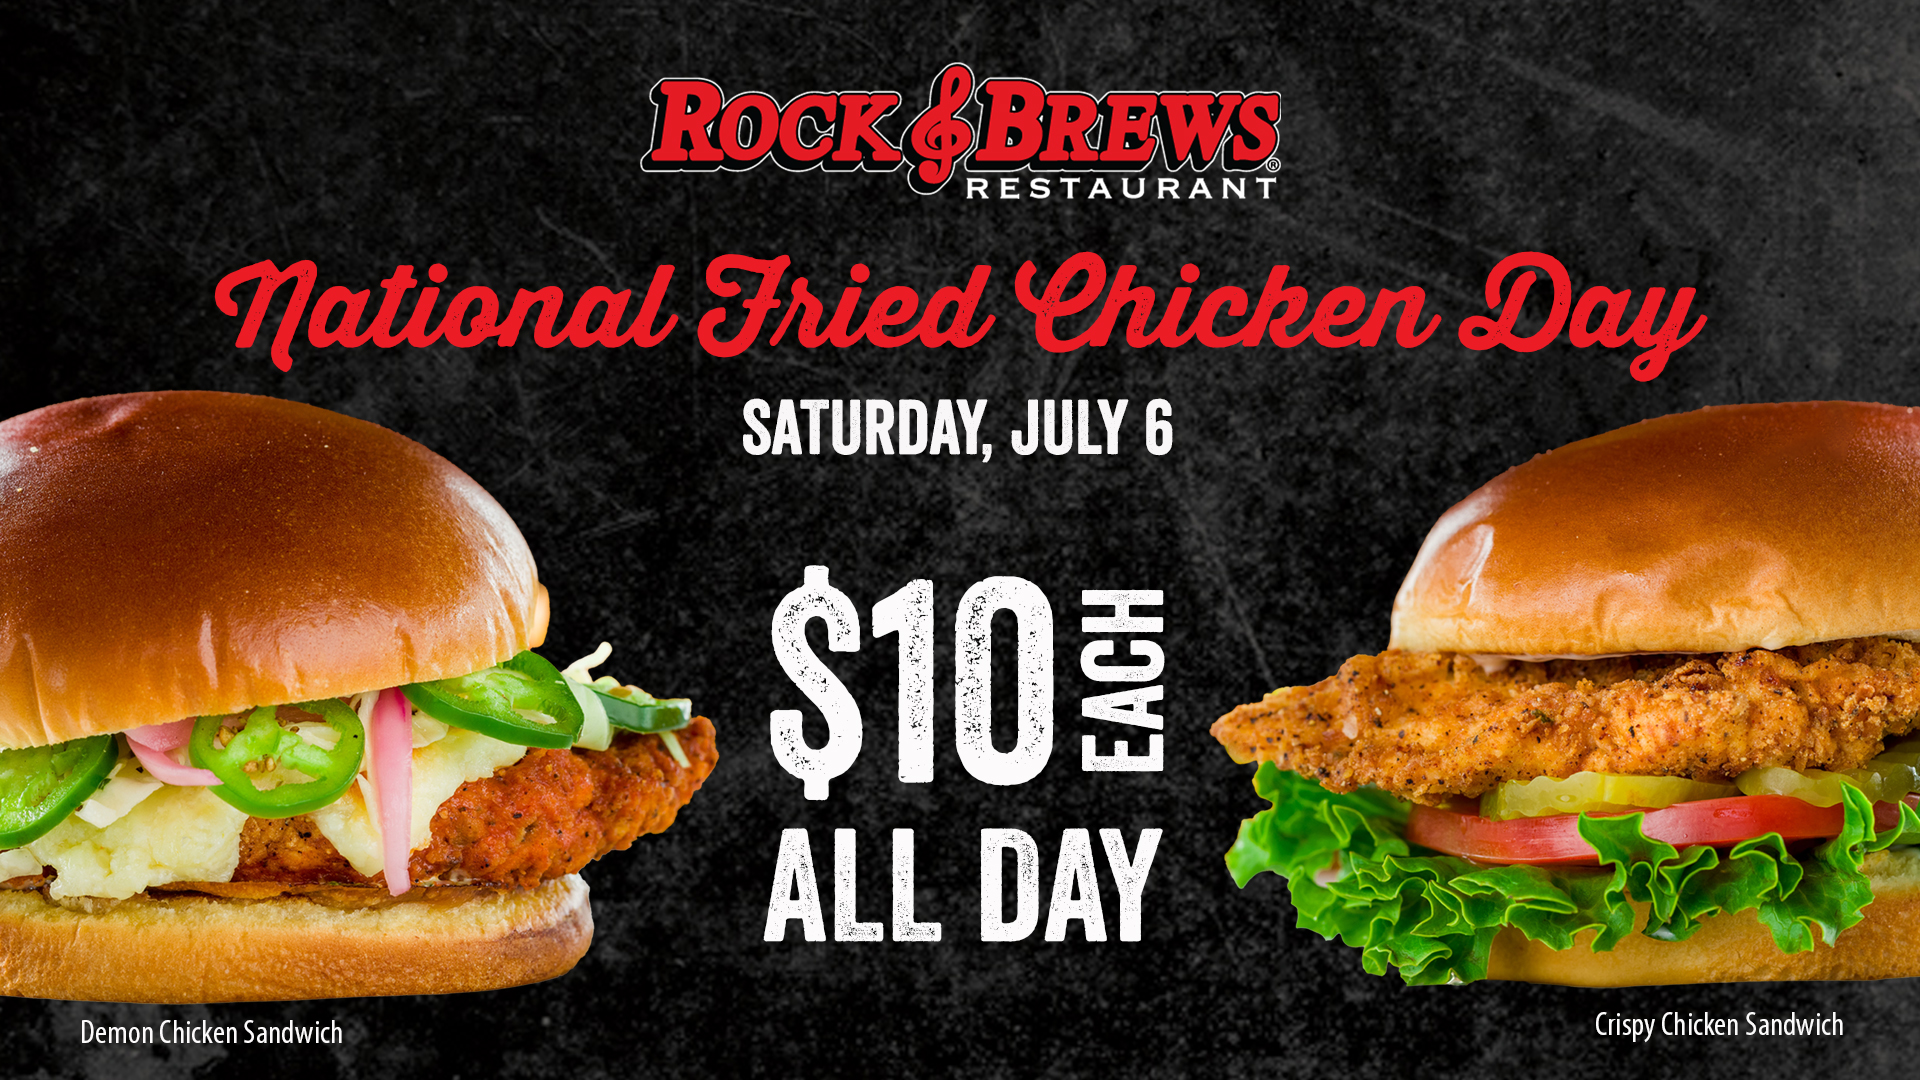 National Fried Chicken Day at Rock & Brews